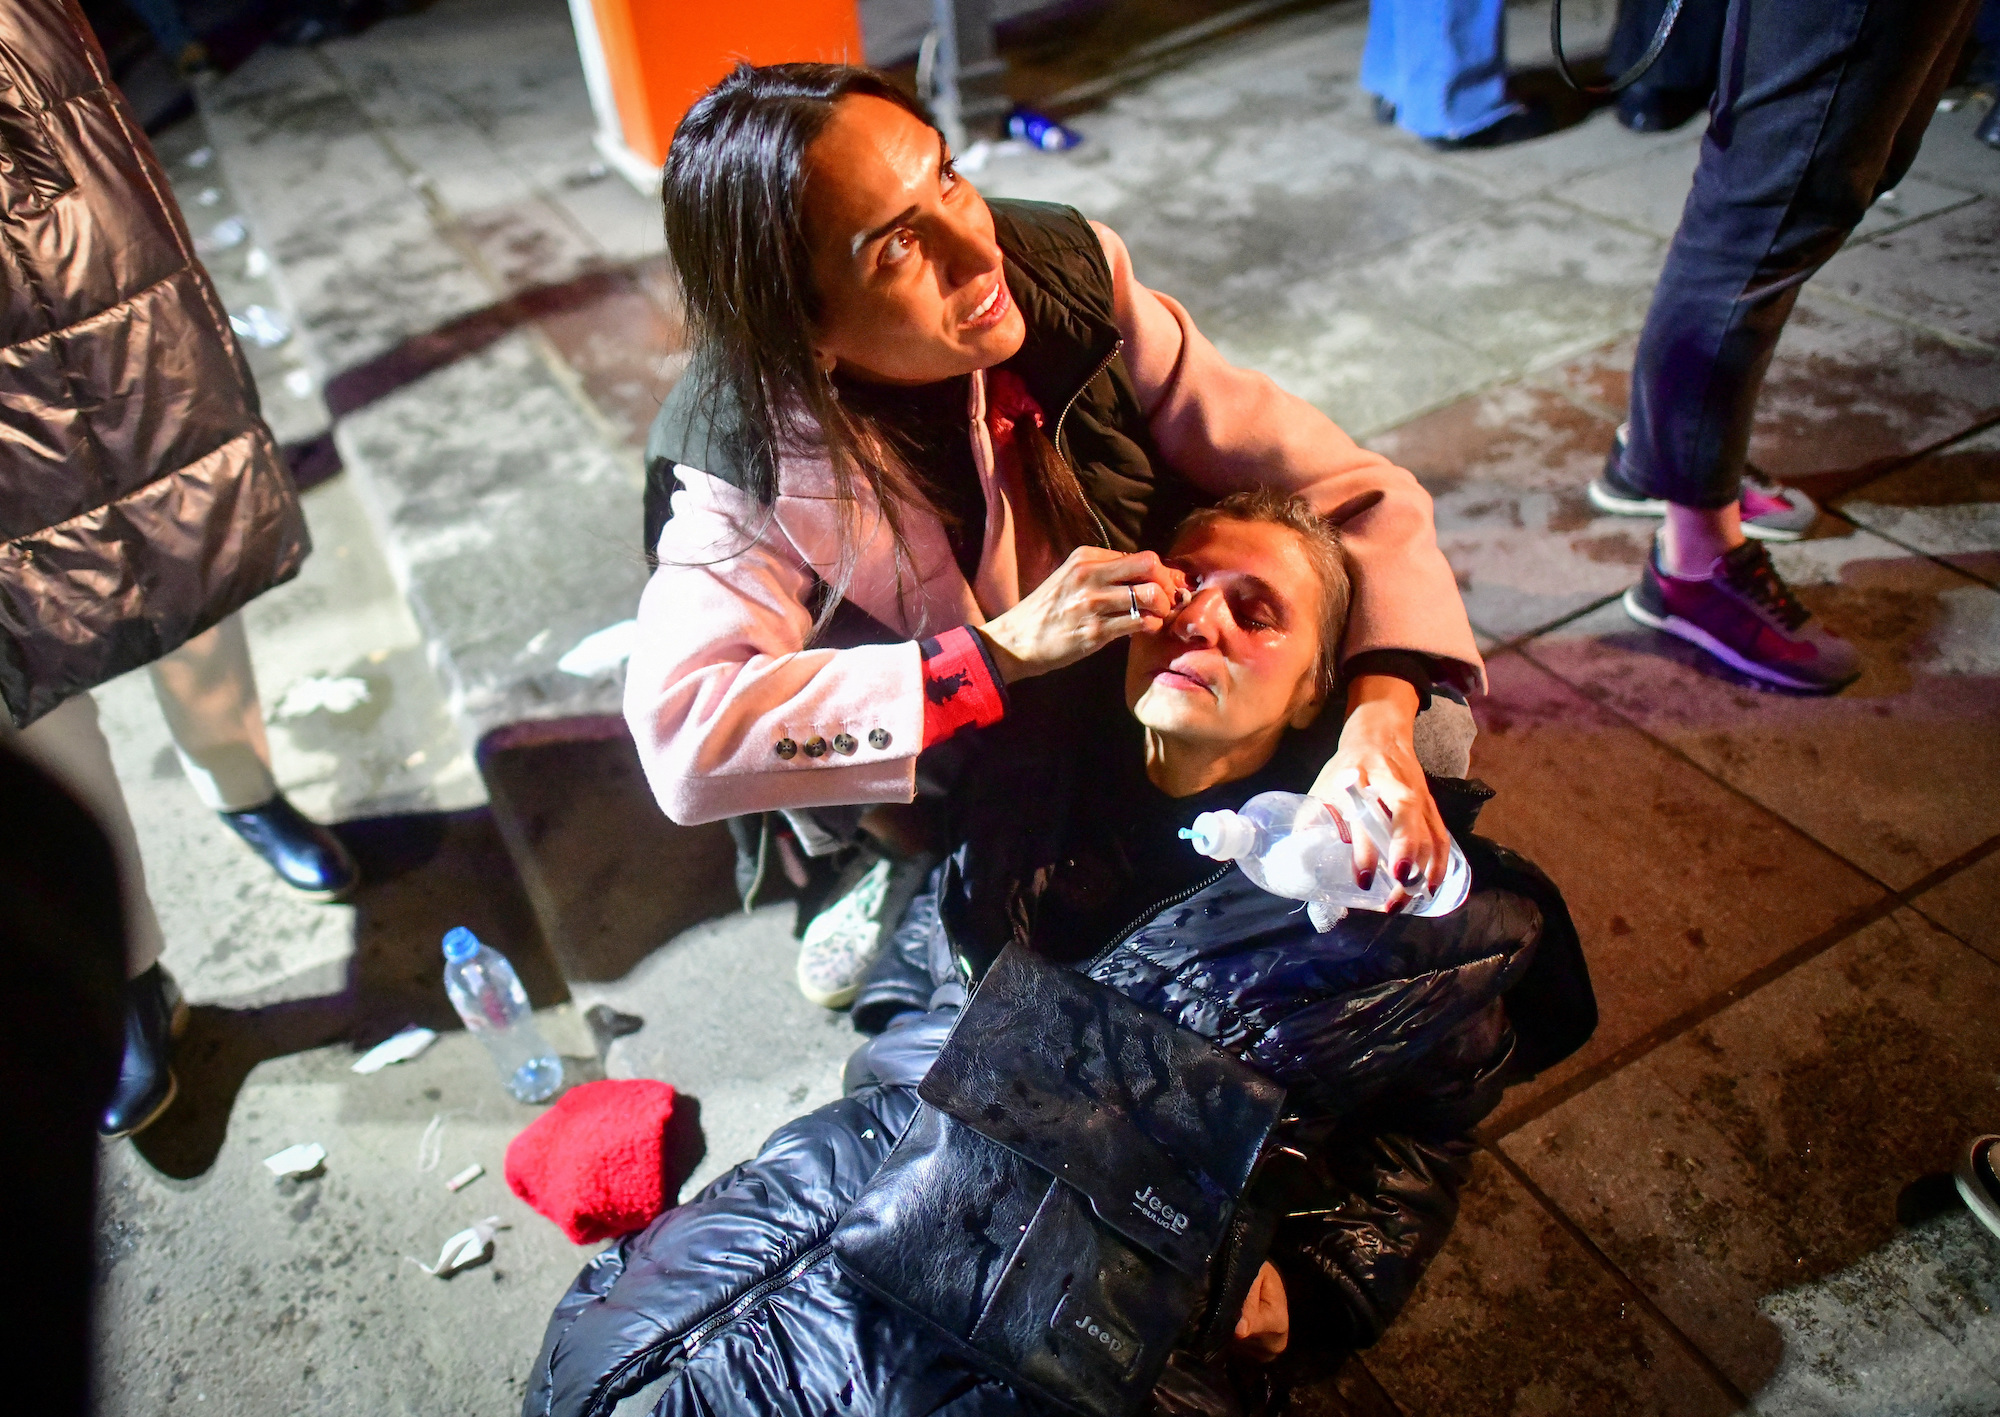 A woman who was affected by tear gas receives medical aid on the street.